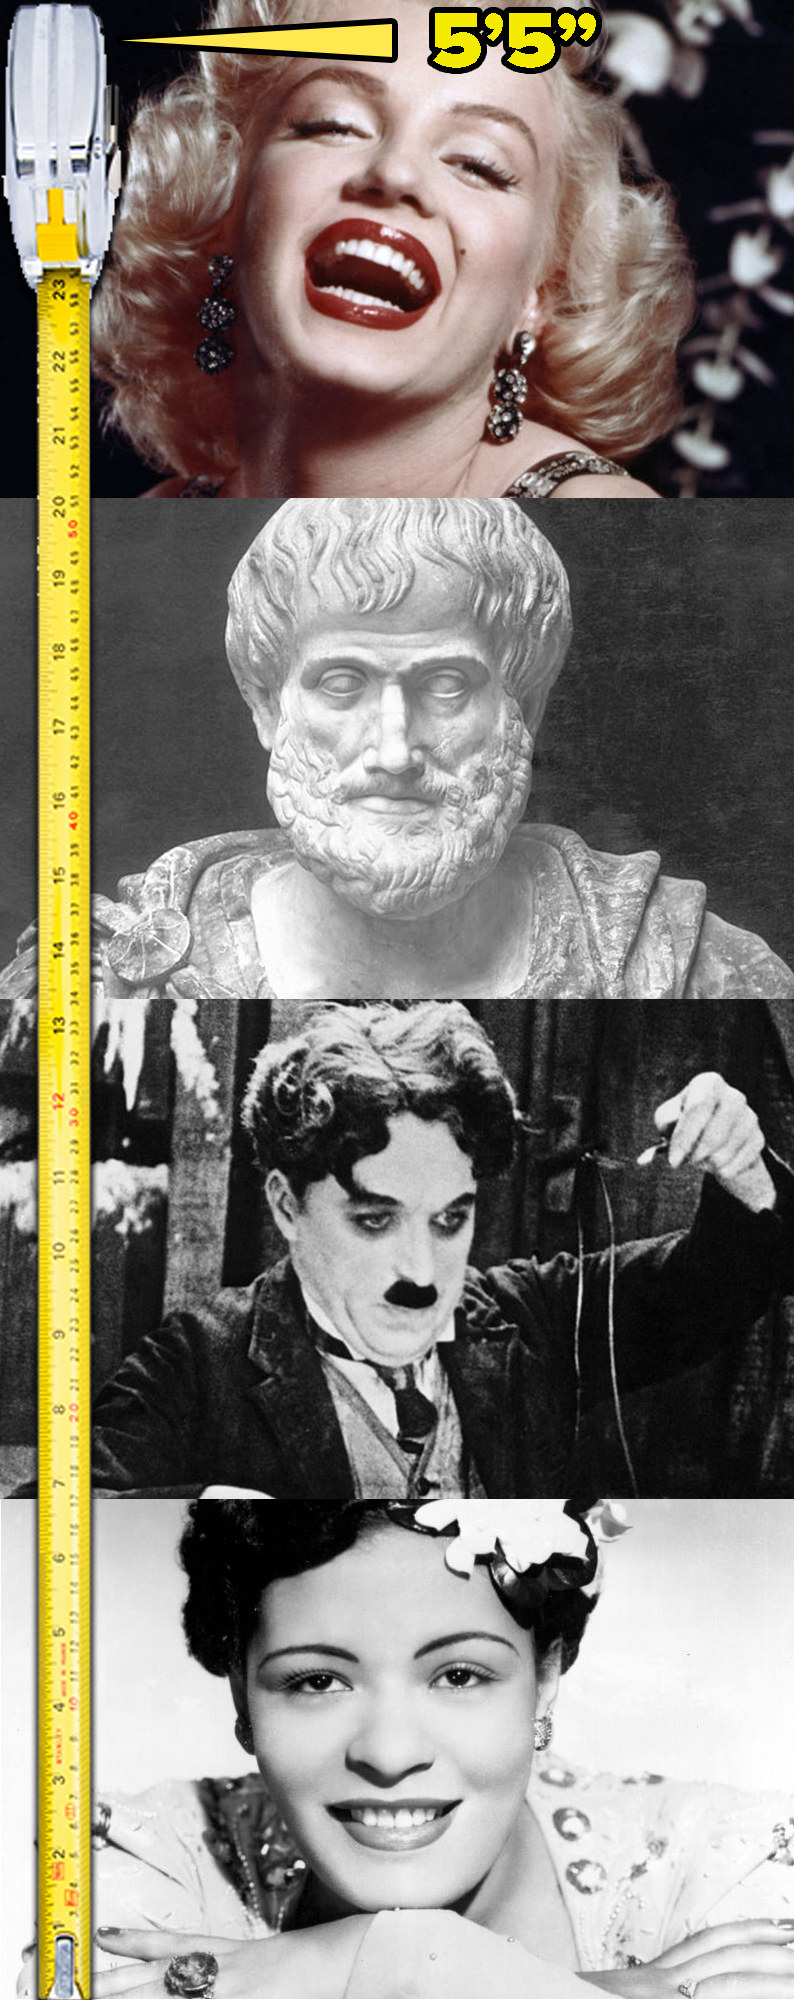 Stacked images of Marilyn Monroe, Aristotle, Charlie Chaplin, and Billie Holiday next to a measuring tape